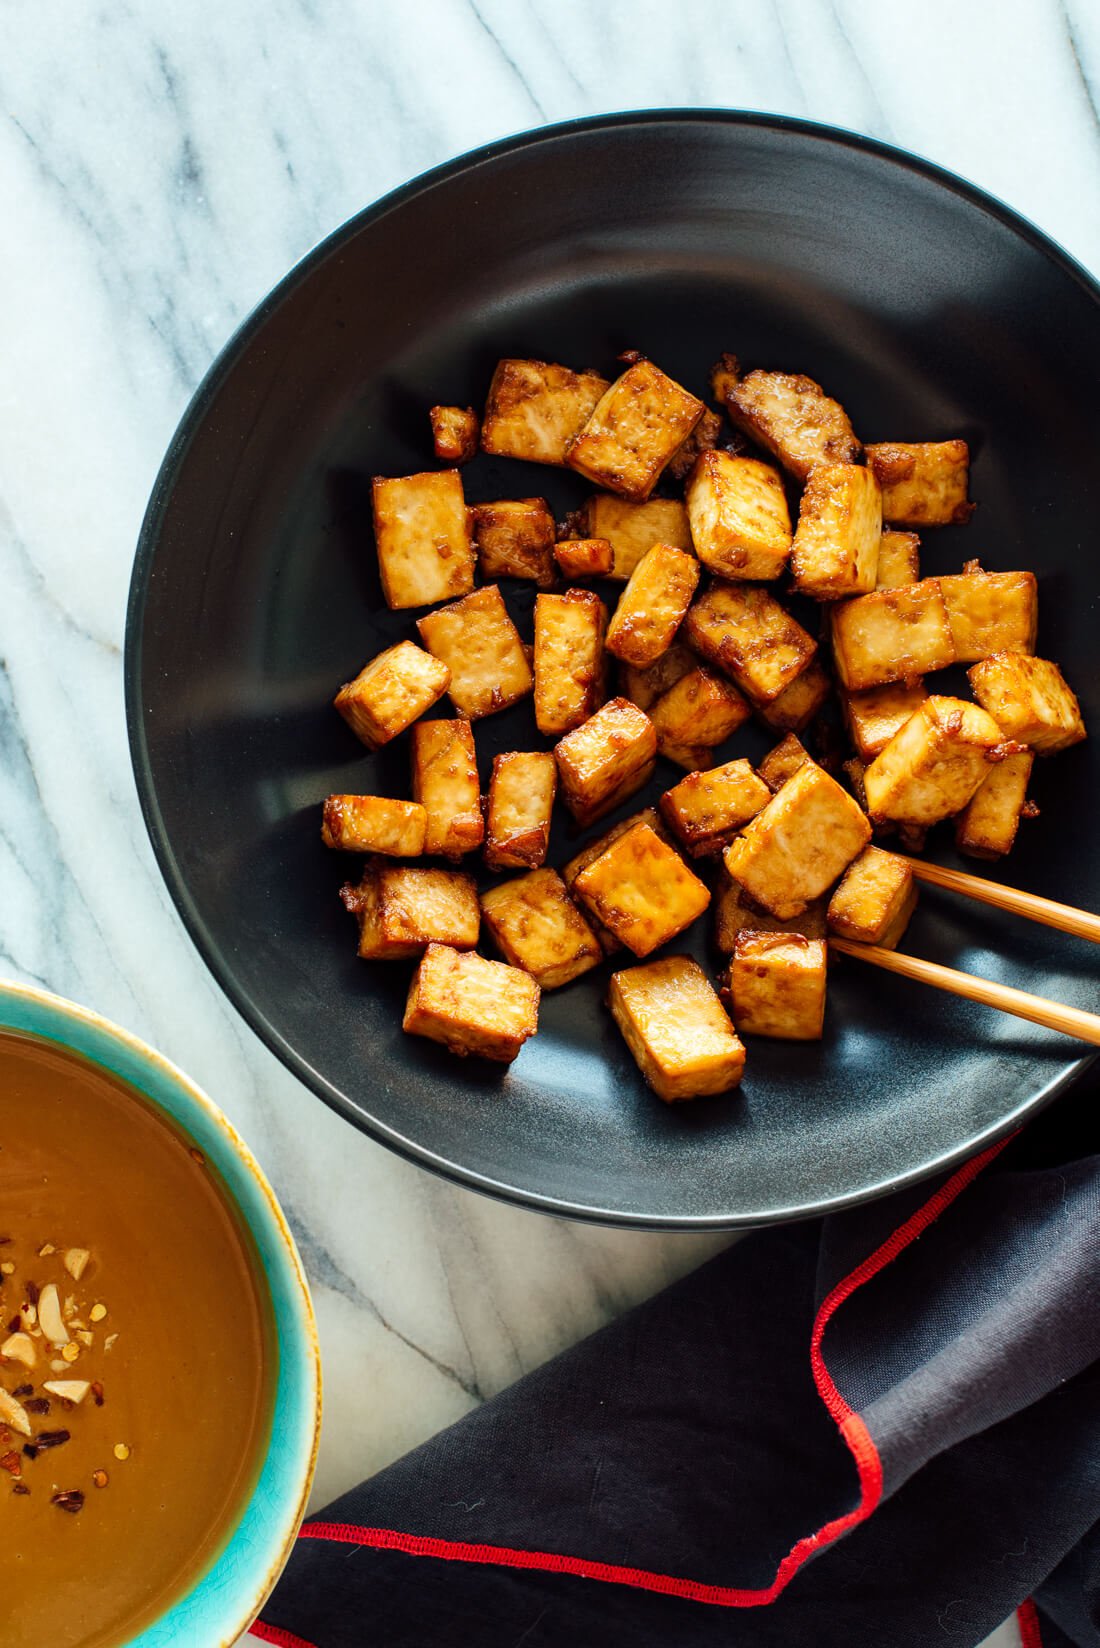 How To Make Crispy Baked Tofu Cookie And Kate,Picture Of A Rate